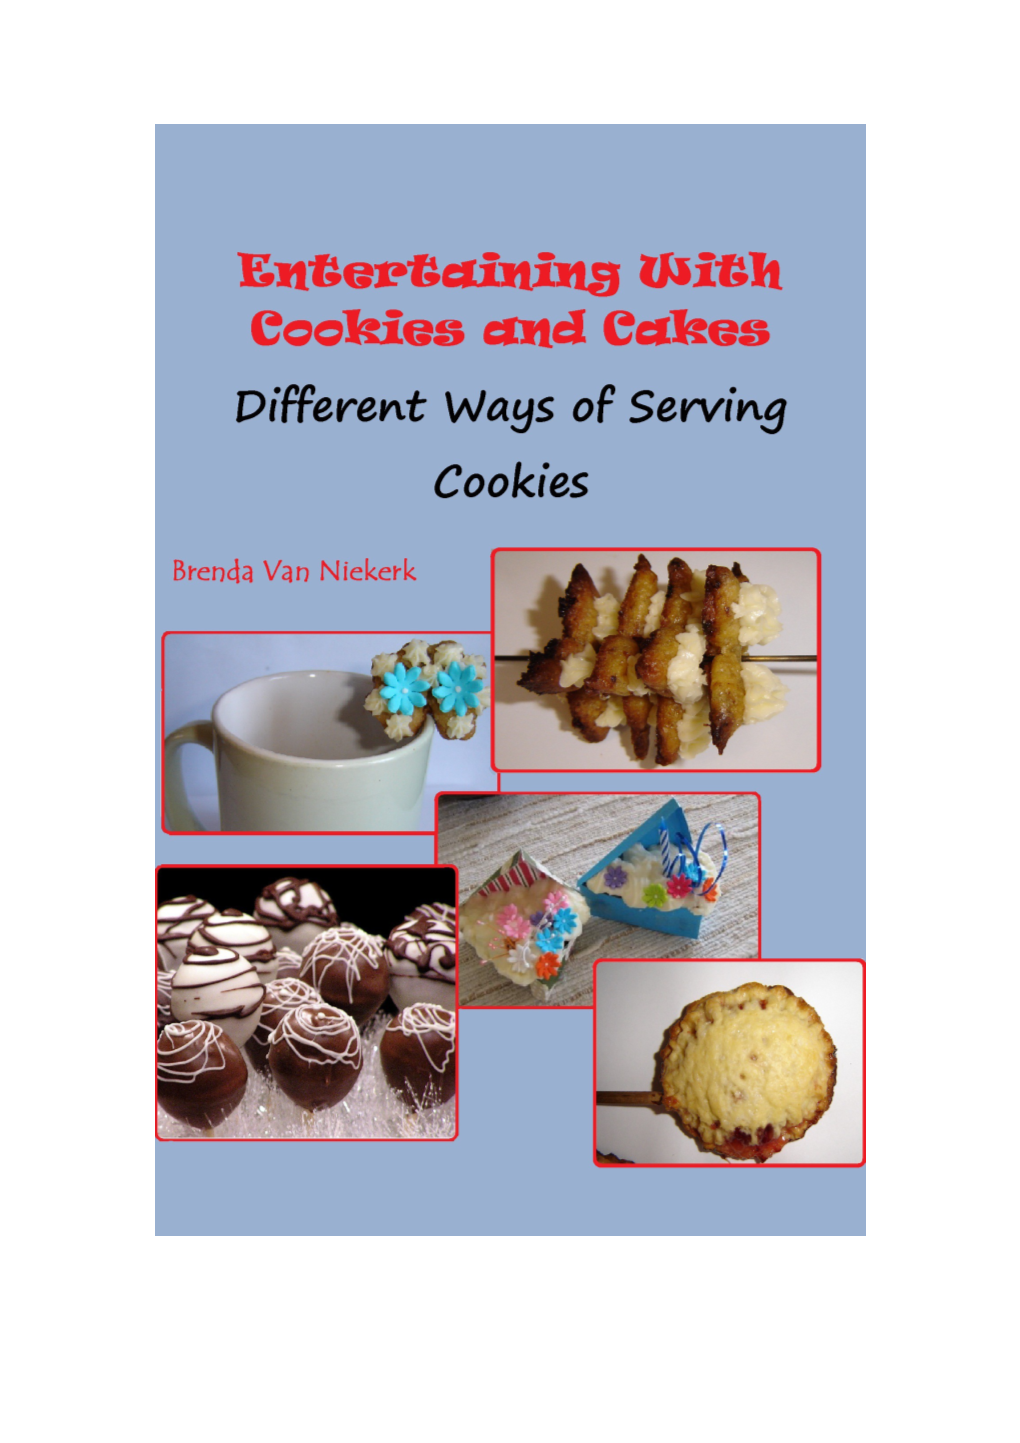 Entertaining with Cookies and Cakes: Different Ways of Serving Cookies